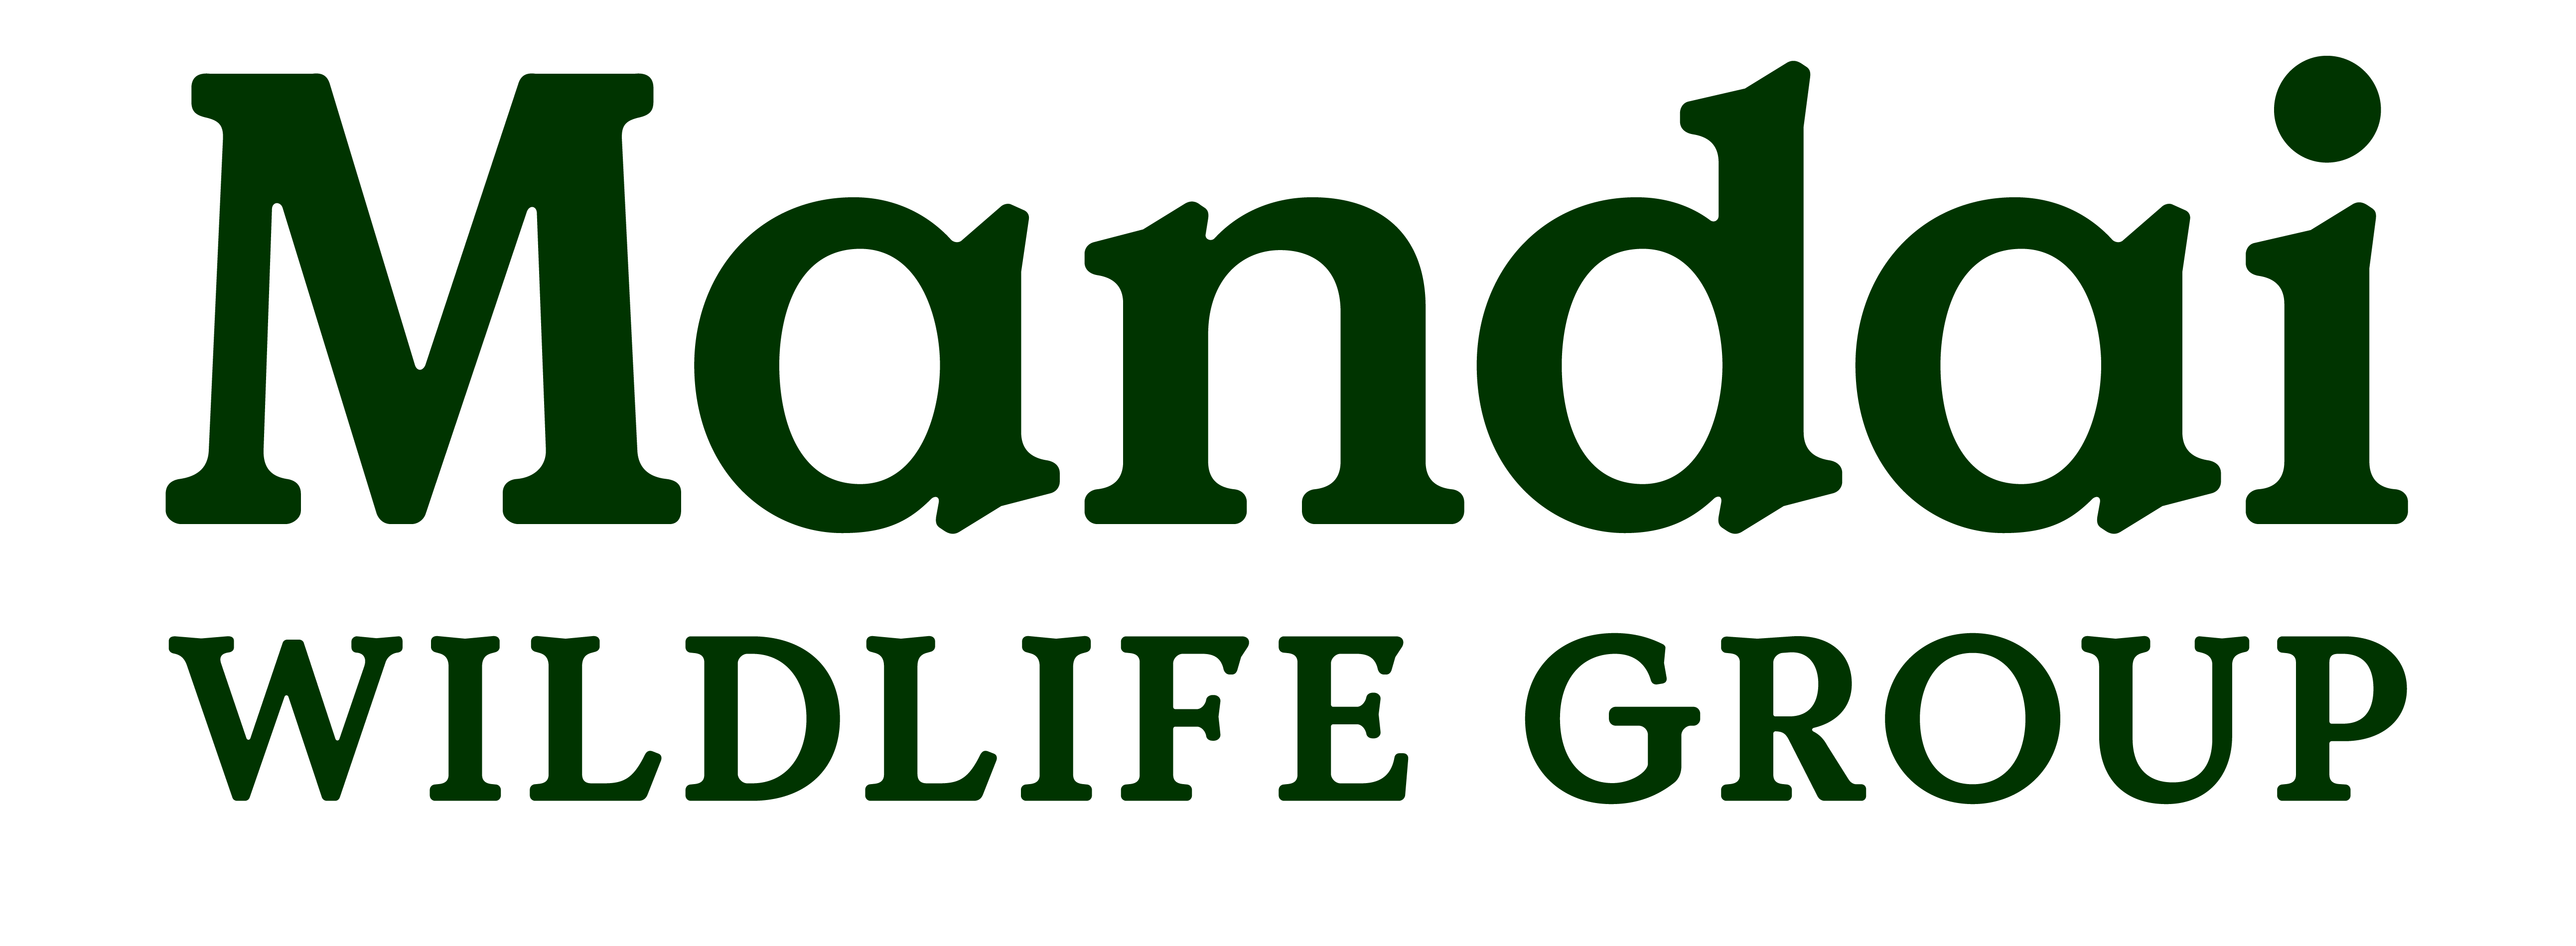 Mandai wildlife group logo. Text written in a forest green color